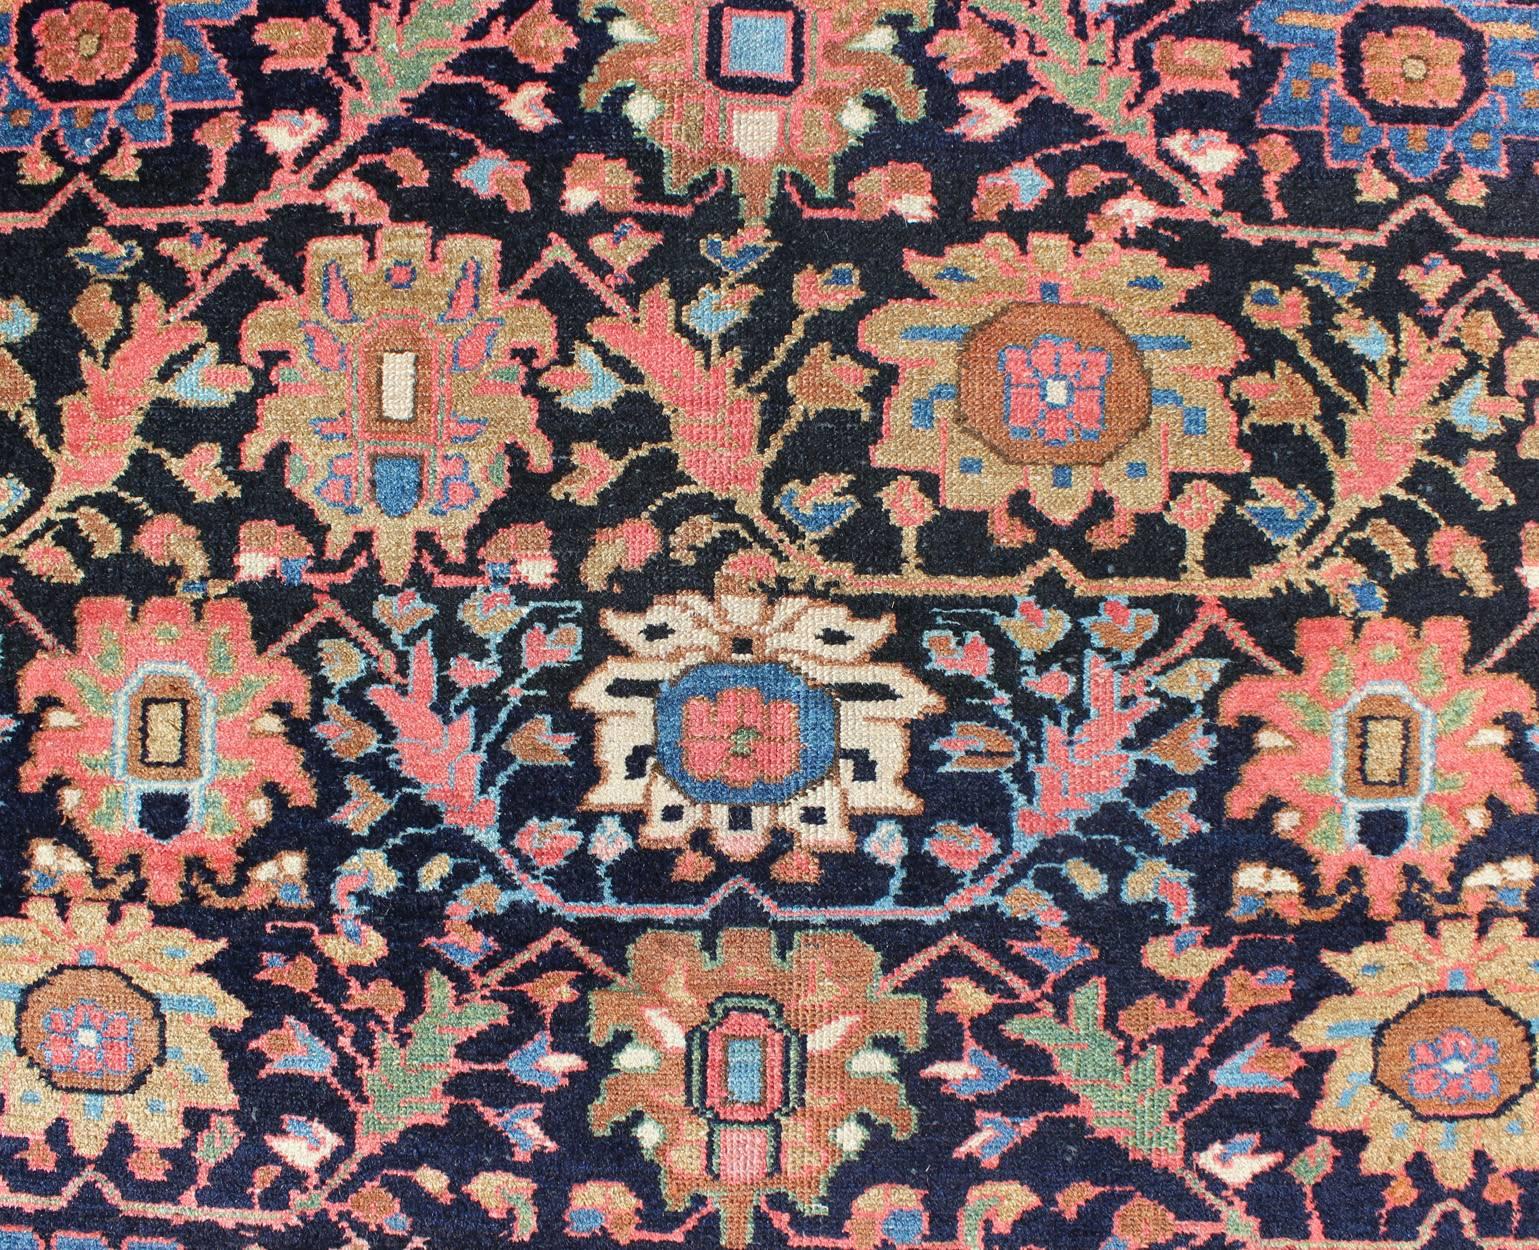 Wool Antique Persian Malayer Rug with Large Floral Motifs in Navy and Multi Colors For Sale